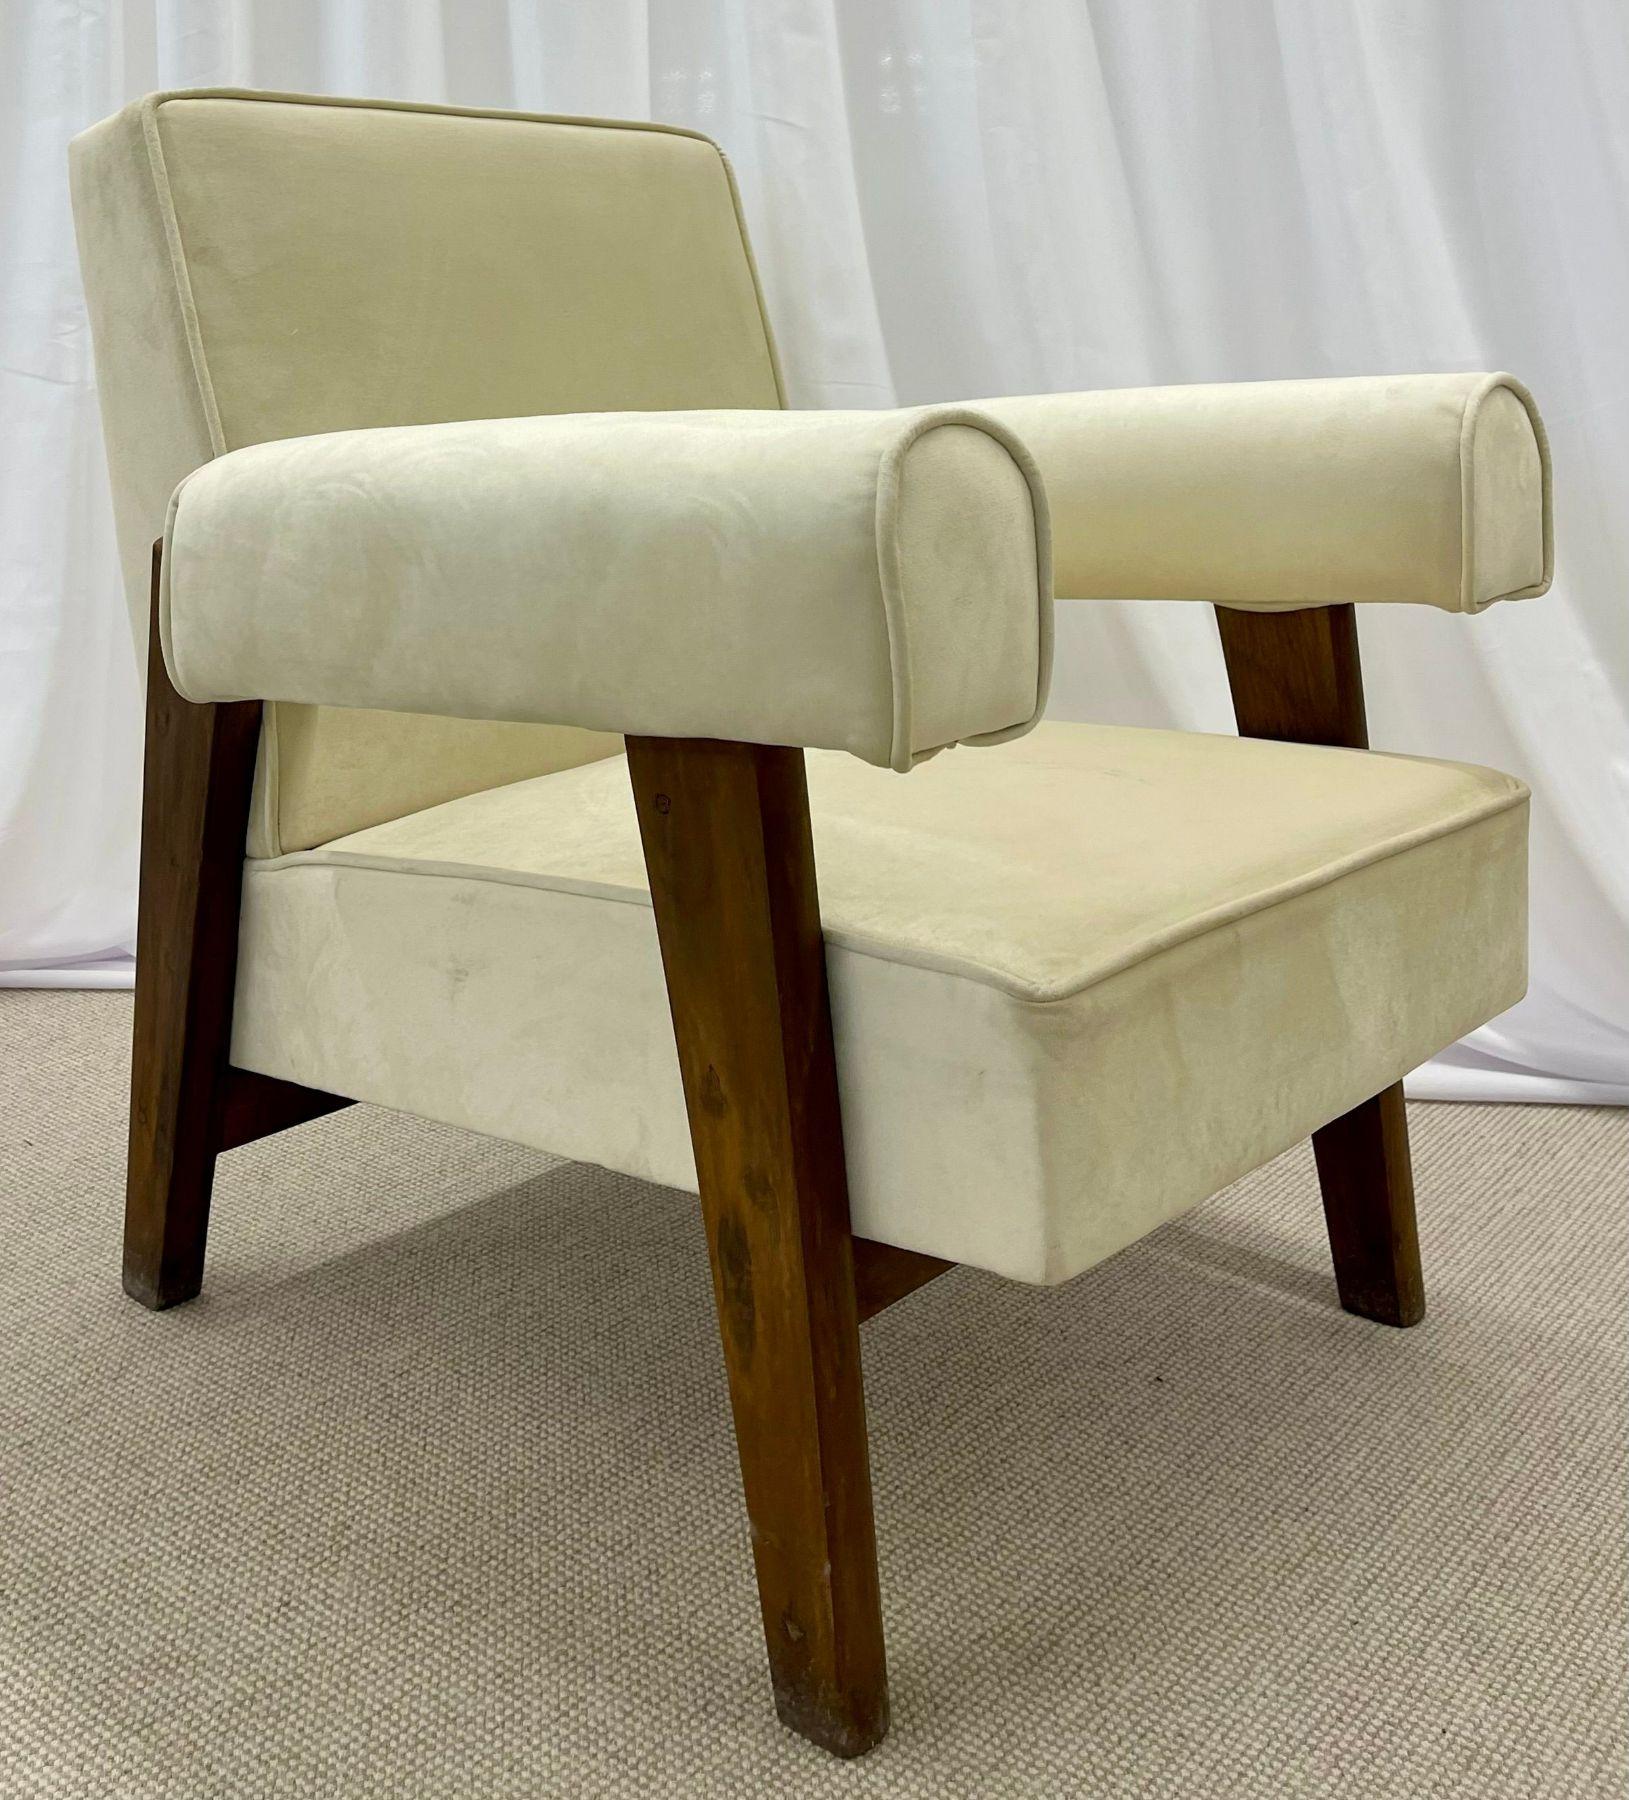 Fabric Pierre Jeanneret, French Mid-Century Modern, Bridge Chairs, Chandigarh c. 1960s For Sale